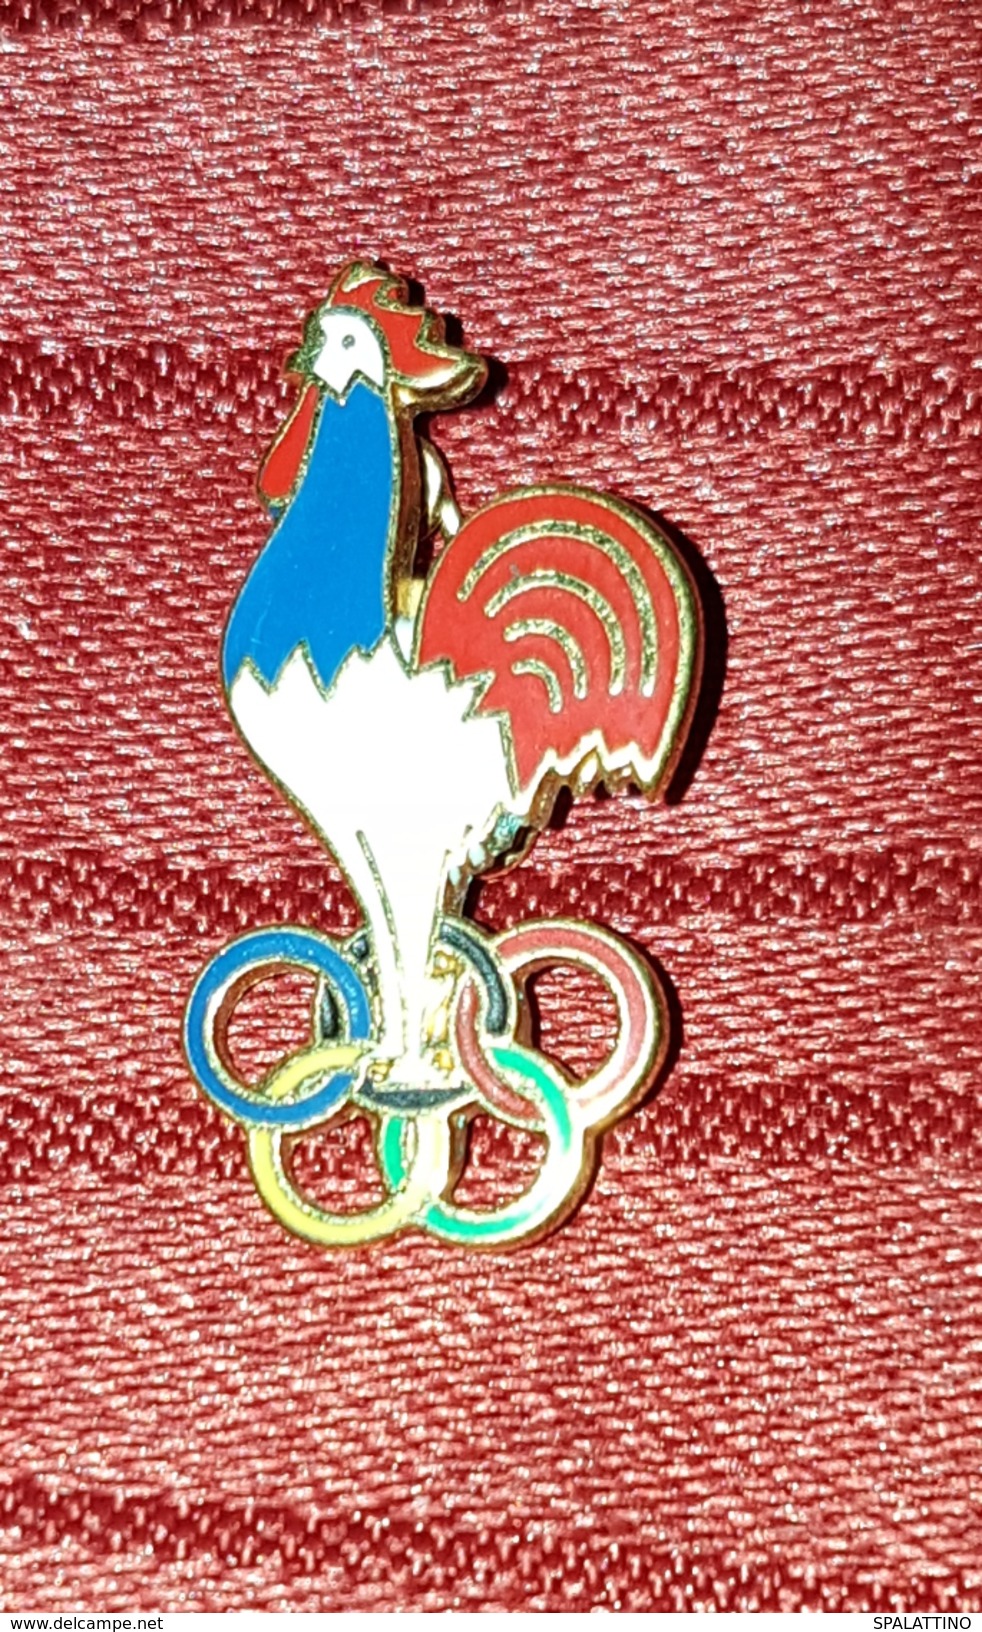 FRANCE OLYMPIC COMMITTEE, ORIGINAL OLD VINTAGE ENAMELLED PIN BADGE - Olympic Games